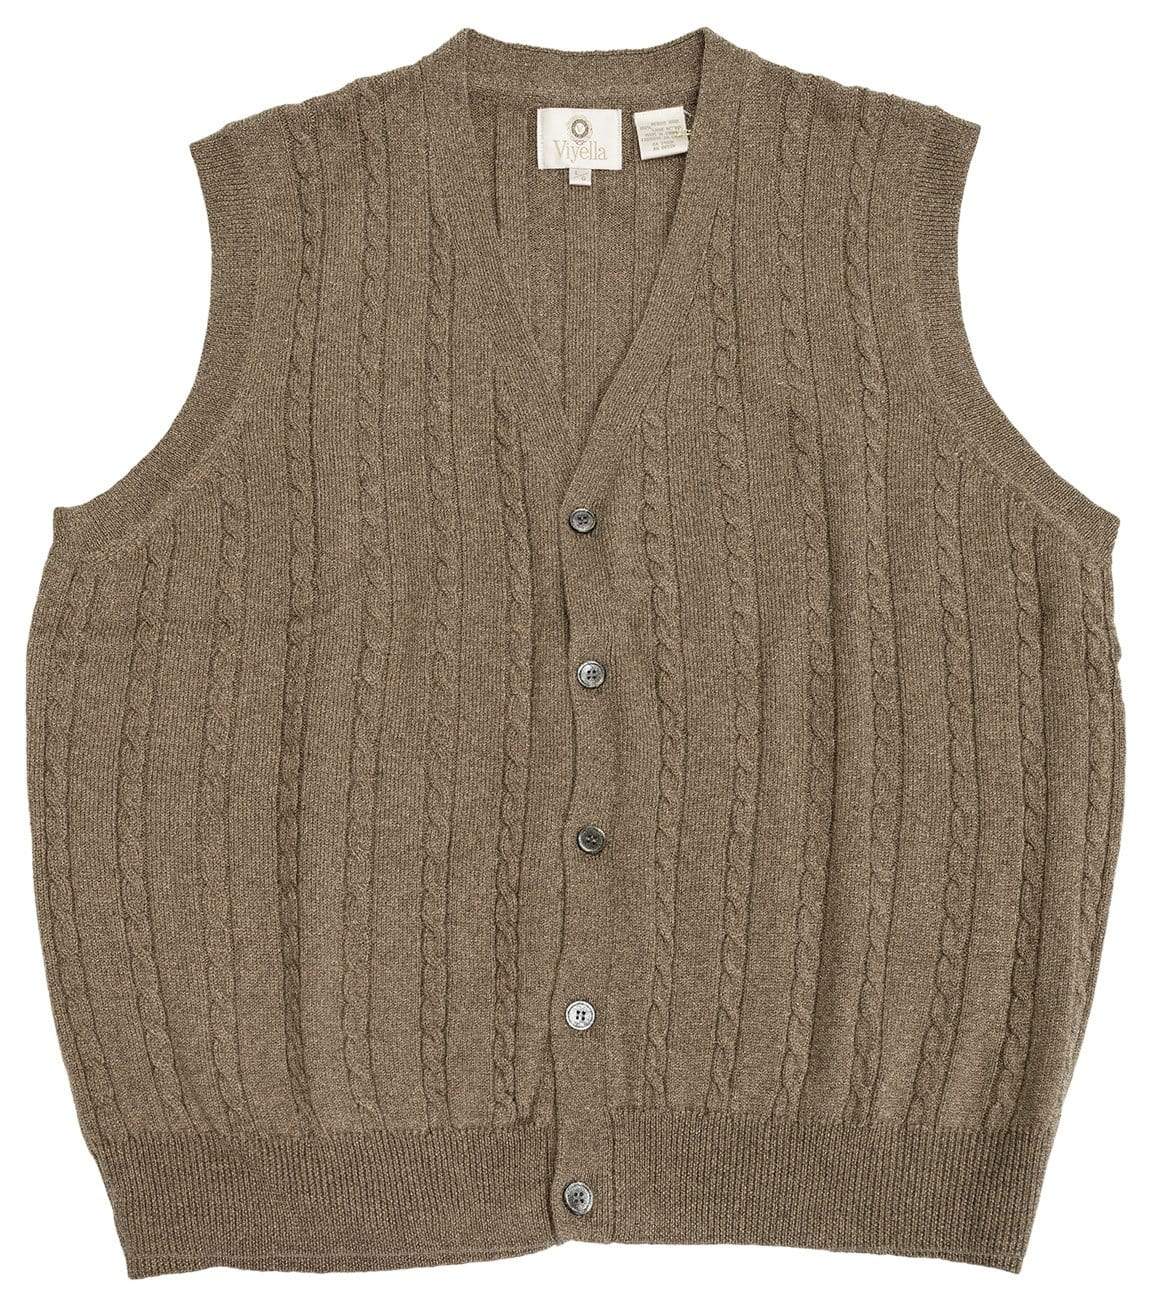 Viyella Stay Stylish and Cozy with our Extra Fine Merino Wool Cable Knit 5 Button Sweater Vest - Available in 11 Stunning Colors